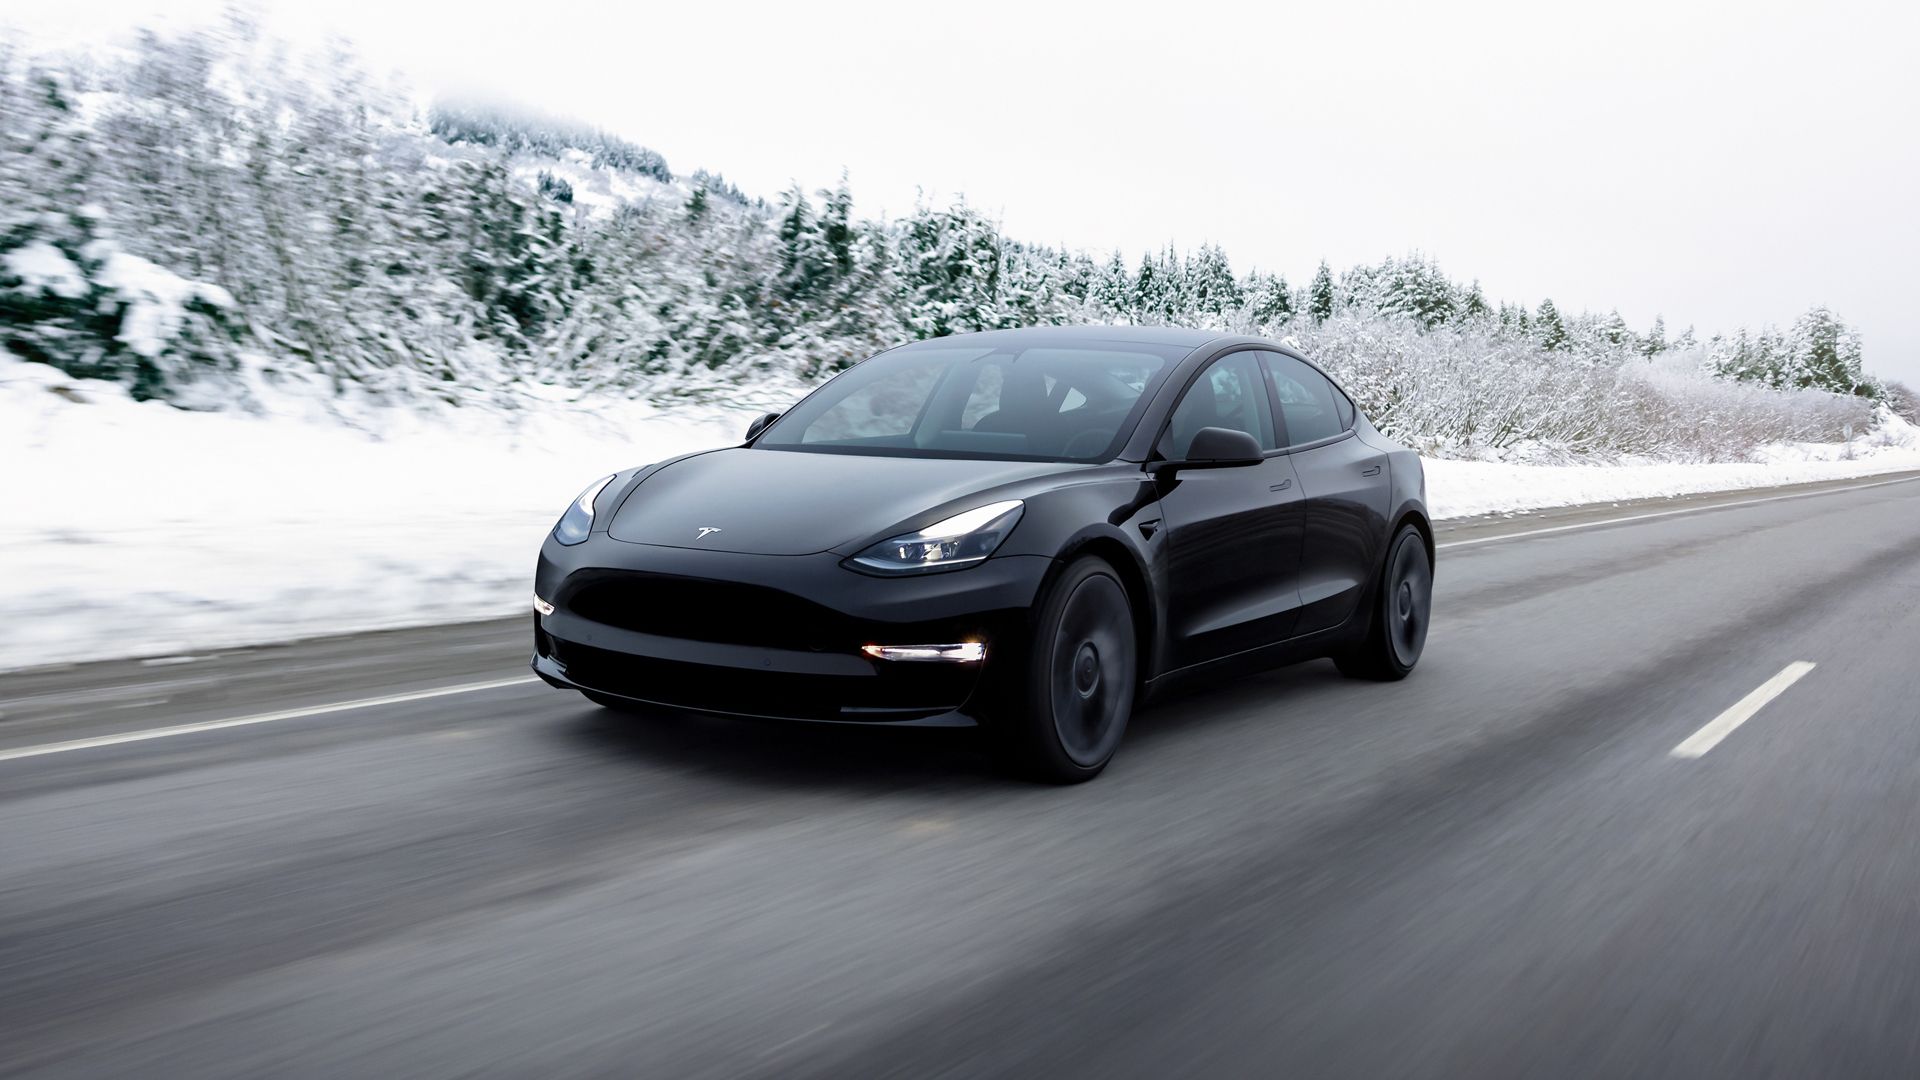 Do You Want A BrandNew Tesla Model 3 For 27,000? Move To Oregon!